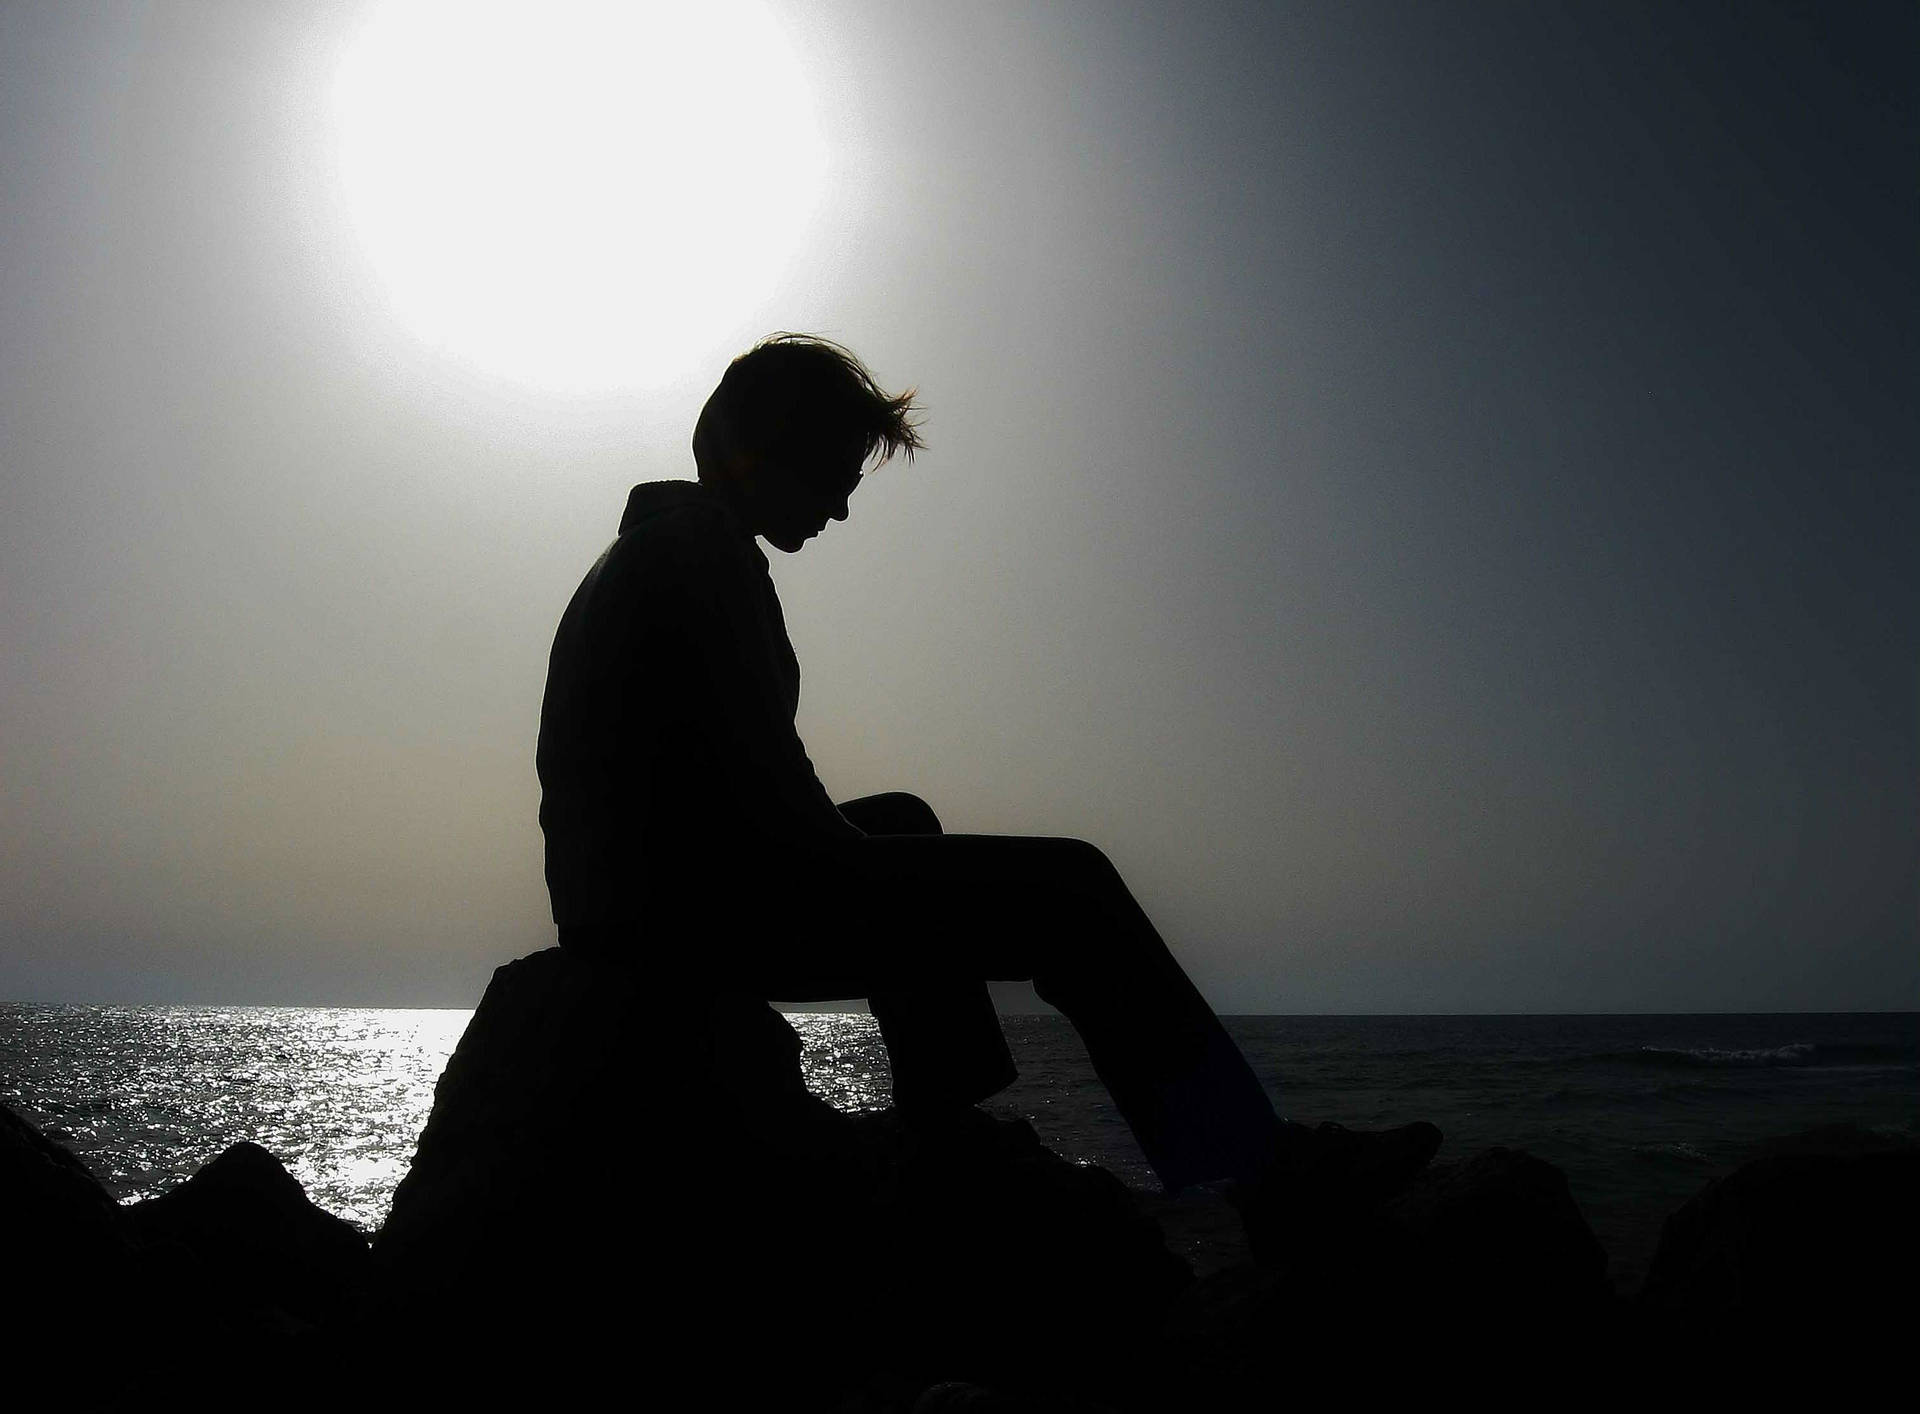 Man In Despair: A Silhouette Of Loneliness